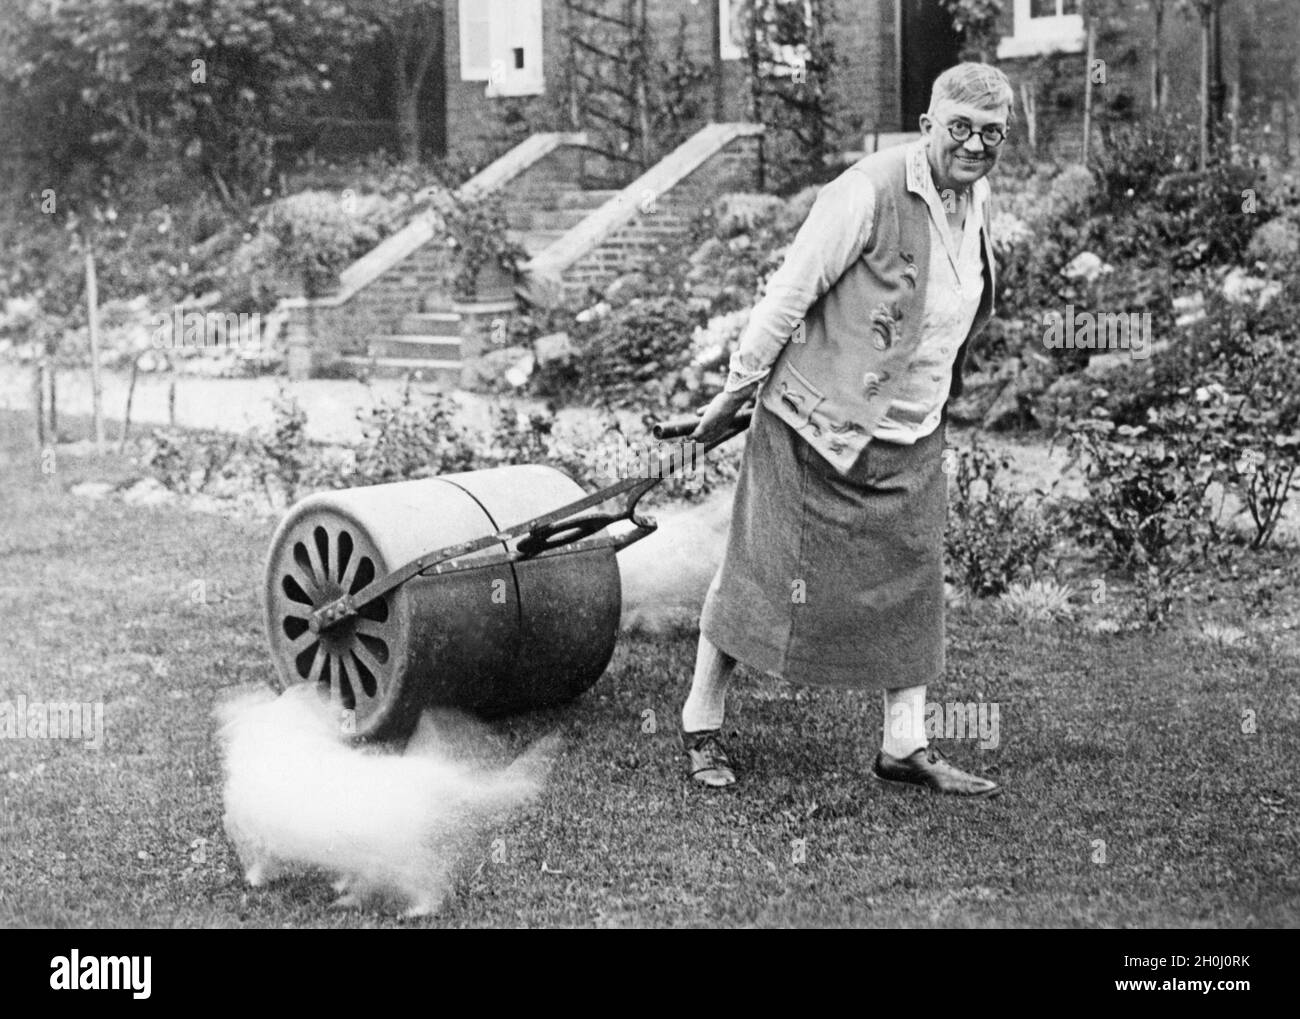 Lilian Barker, the only female prison governor in the UK, rolling the grass in her prison garden. She runs Aylesbury Youth Correctional Centre in Buckinghamshire, England. [automated translation] Stock Photo